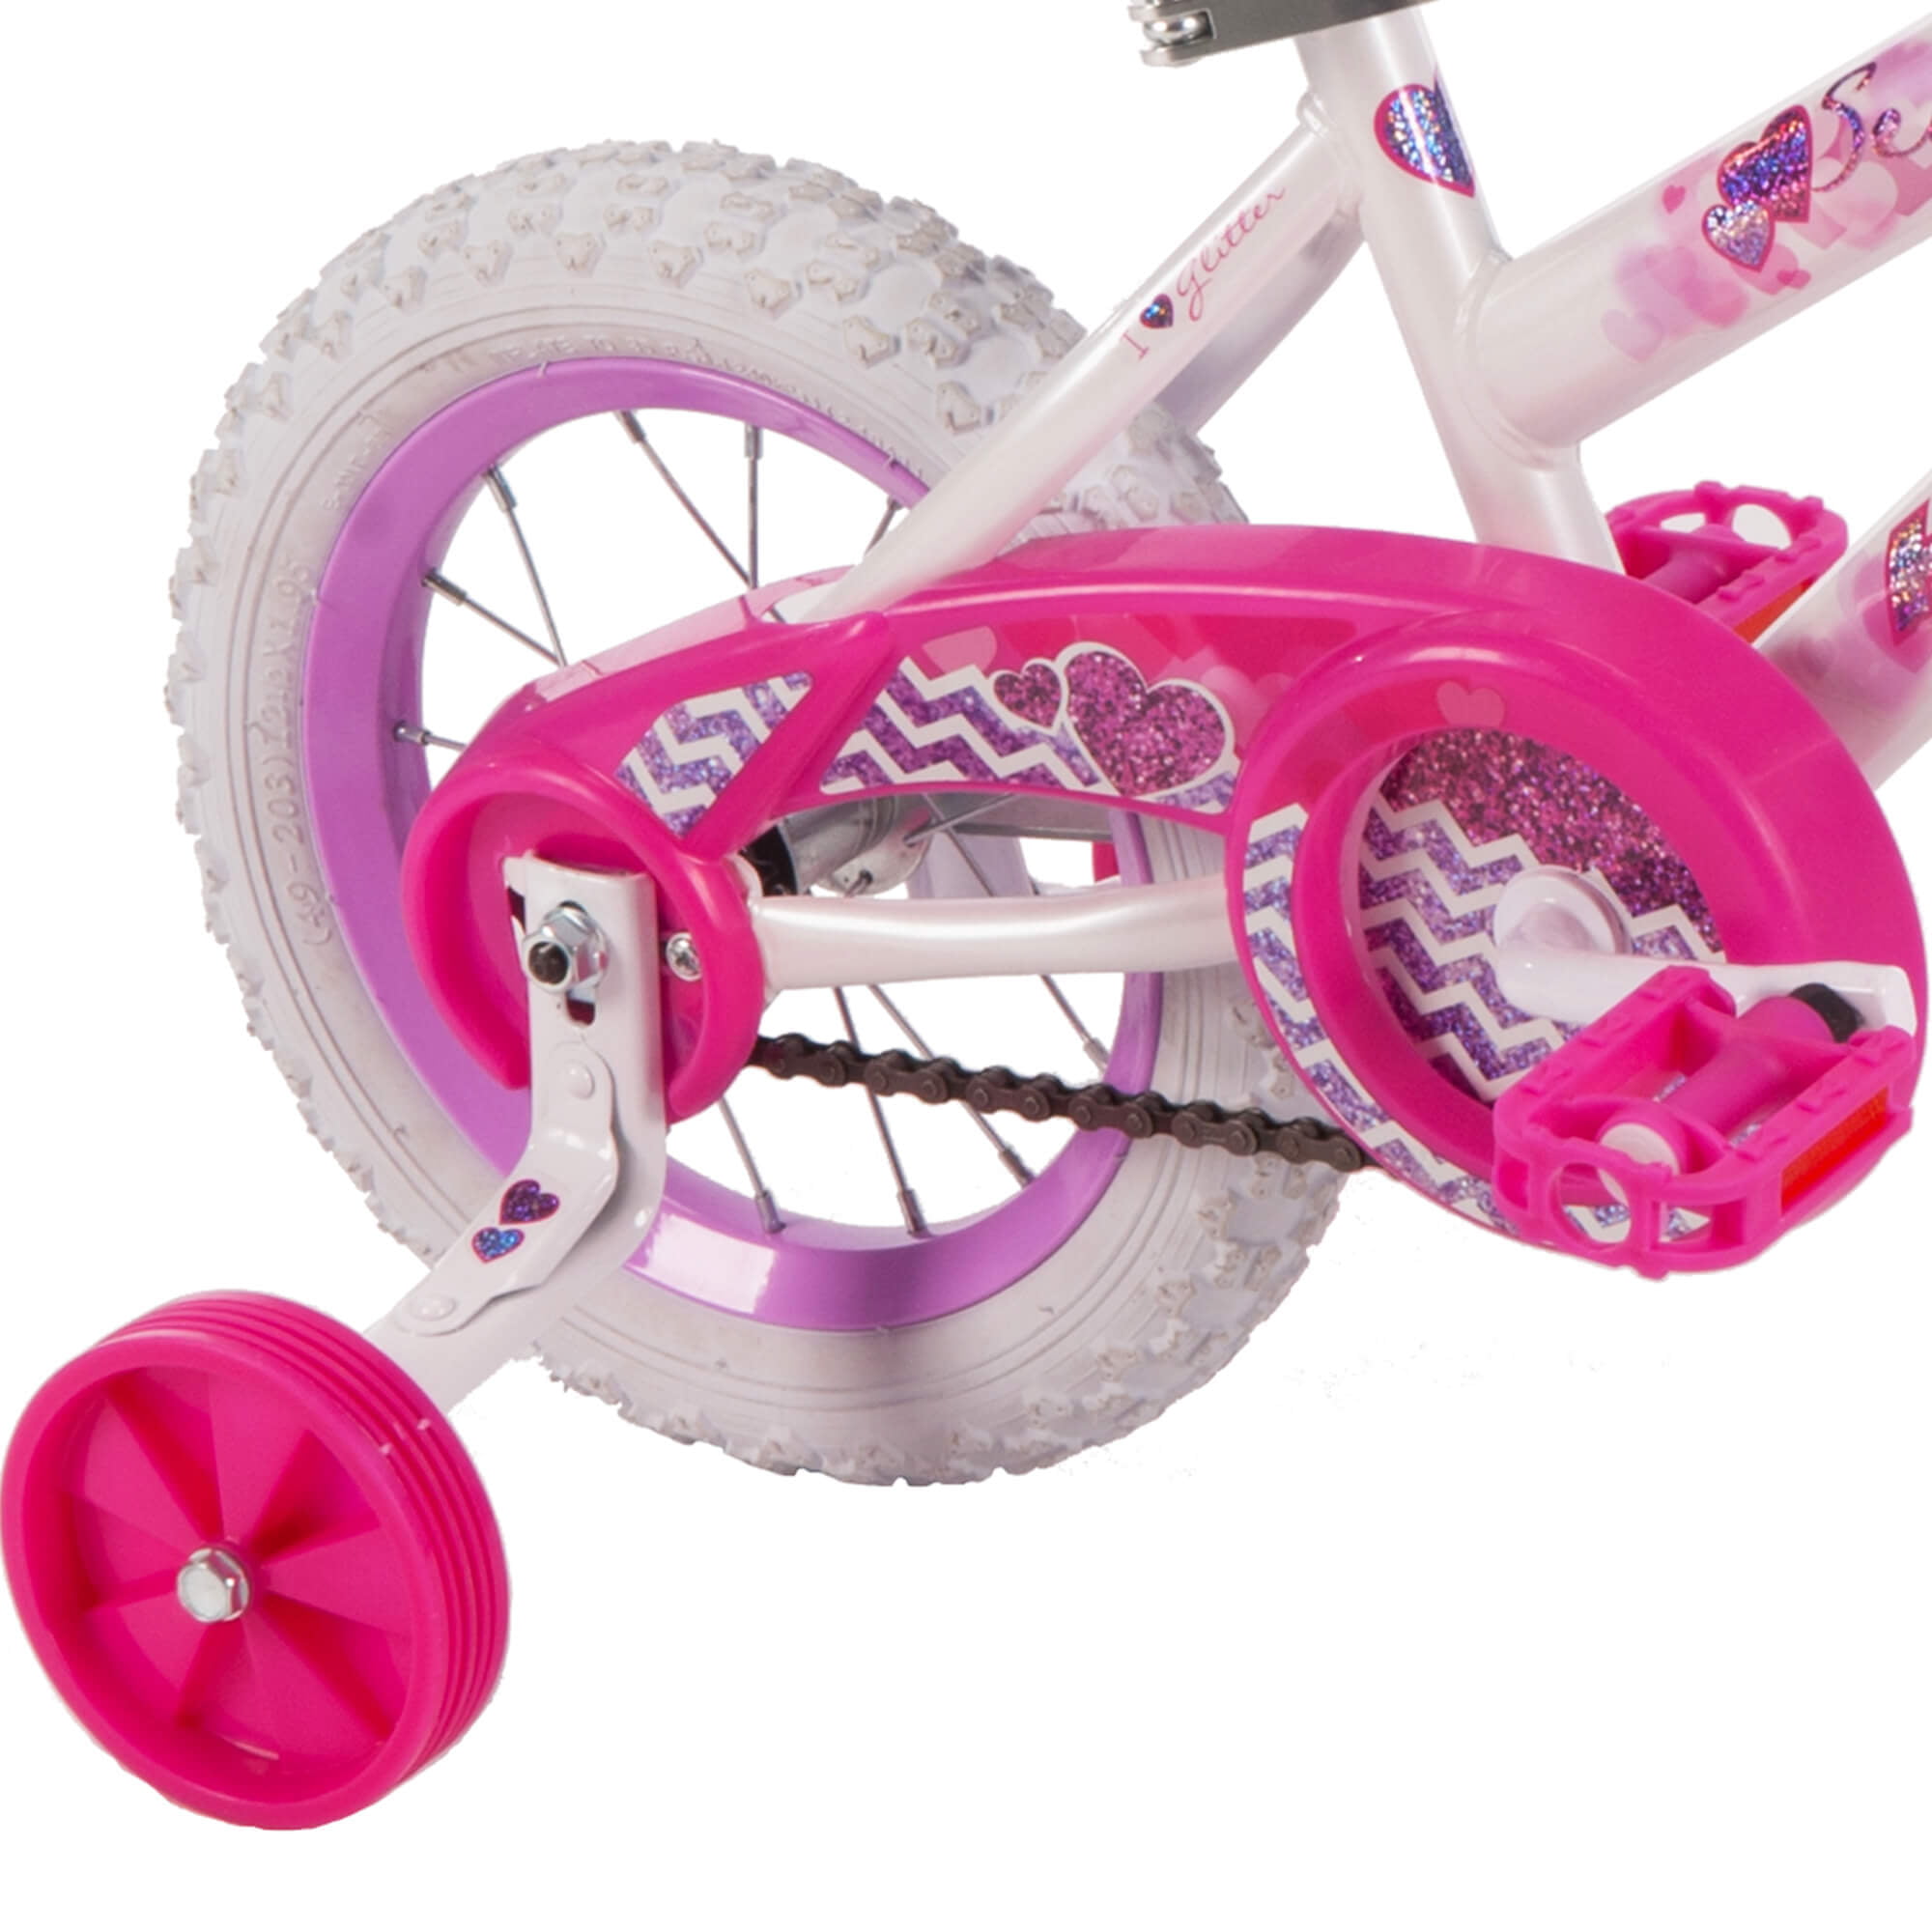 Pink Details about   Huffy 10-inch Sea Star Girls' Balance Bike for Kids 